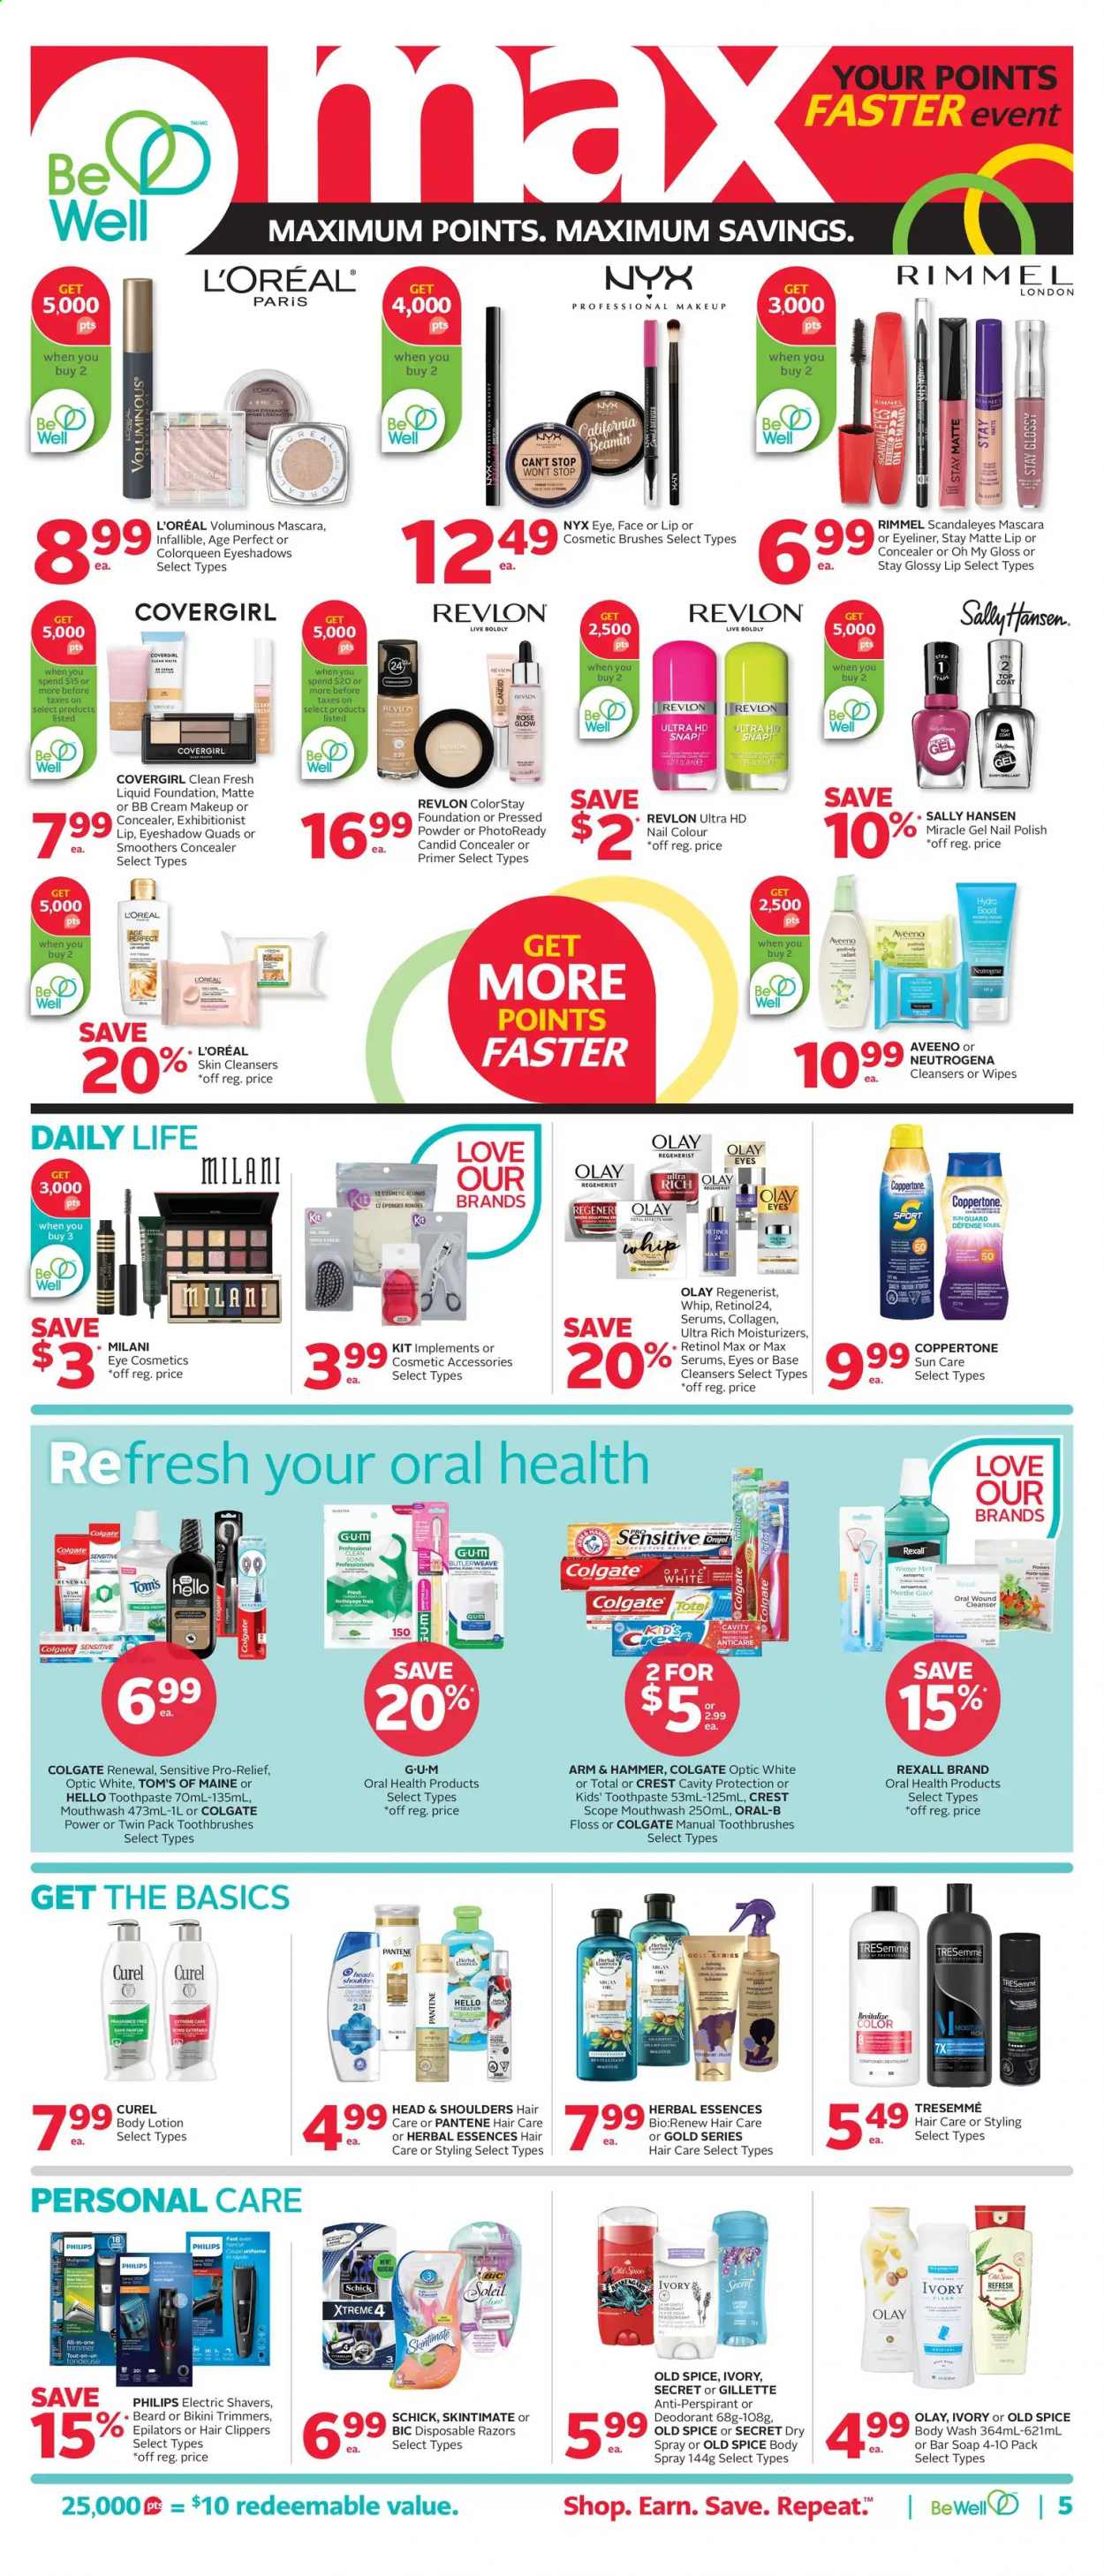 thumbnail - Rexall Flyer - July 09, 2021 - July 15, 2021 - Sales products - ARM & HAMMER, spice, Boost, wipes, Aveeno, body wash, soap bar, soap, toothpaste, mouthwash, Crest, cleanser, L’Oréal, moisturizer, Olay, Curél, NYX Cosmetics, conditioner, Revlon, TRESemmé, Herbal Essences, body lotion, body spray, anti-perspirant, BIC, Schick, disposable razor, cosmetic accessory, polish, corrector, eyeshadow, makeup, Rimmel, eyeliner, face powder, Gillette, mascara, Neutrogena, Sally Hansen, shampoo, Head & Shoulders, Pantene, Old Spice, Oral-B, deodorant. Page 9.